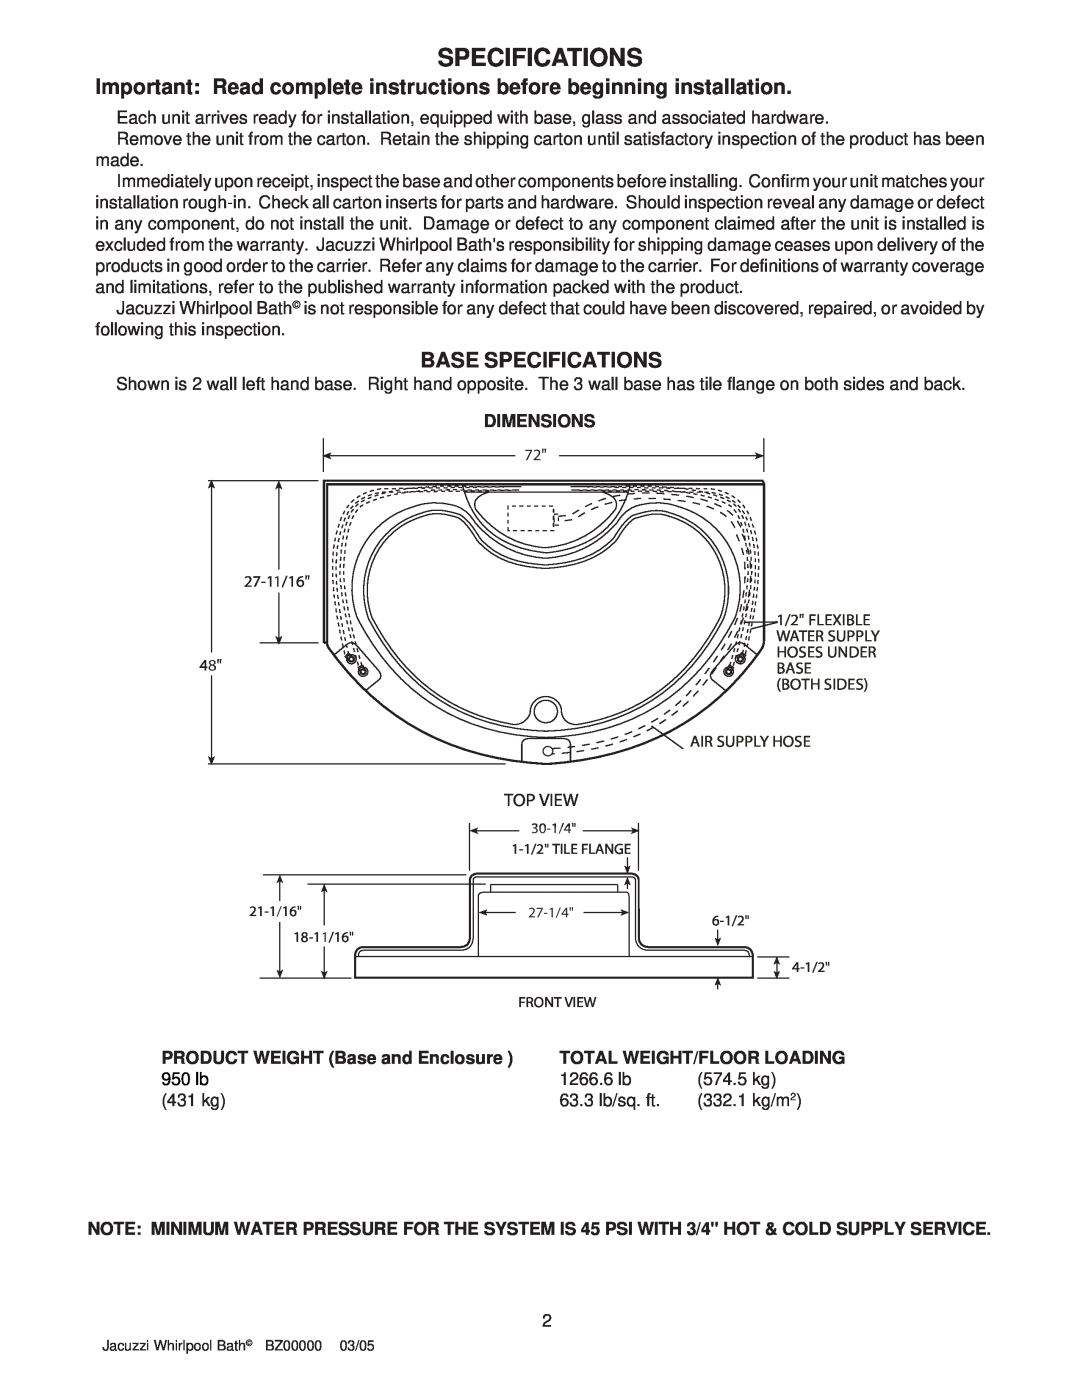 Jacuzzi BZ00000 Important Read complete instructions before beginning installation, Base Specifications, Dimensions 